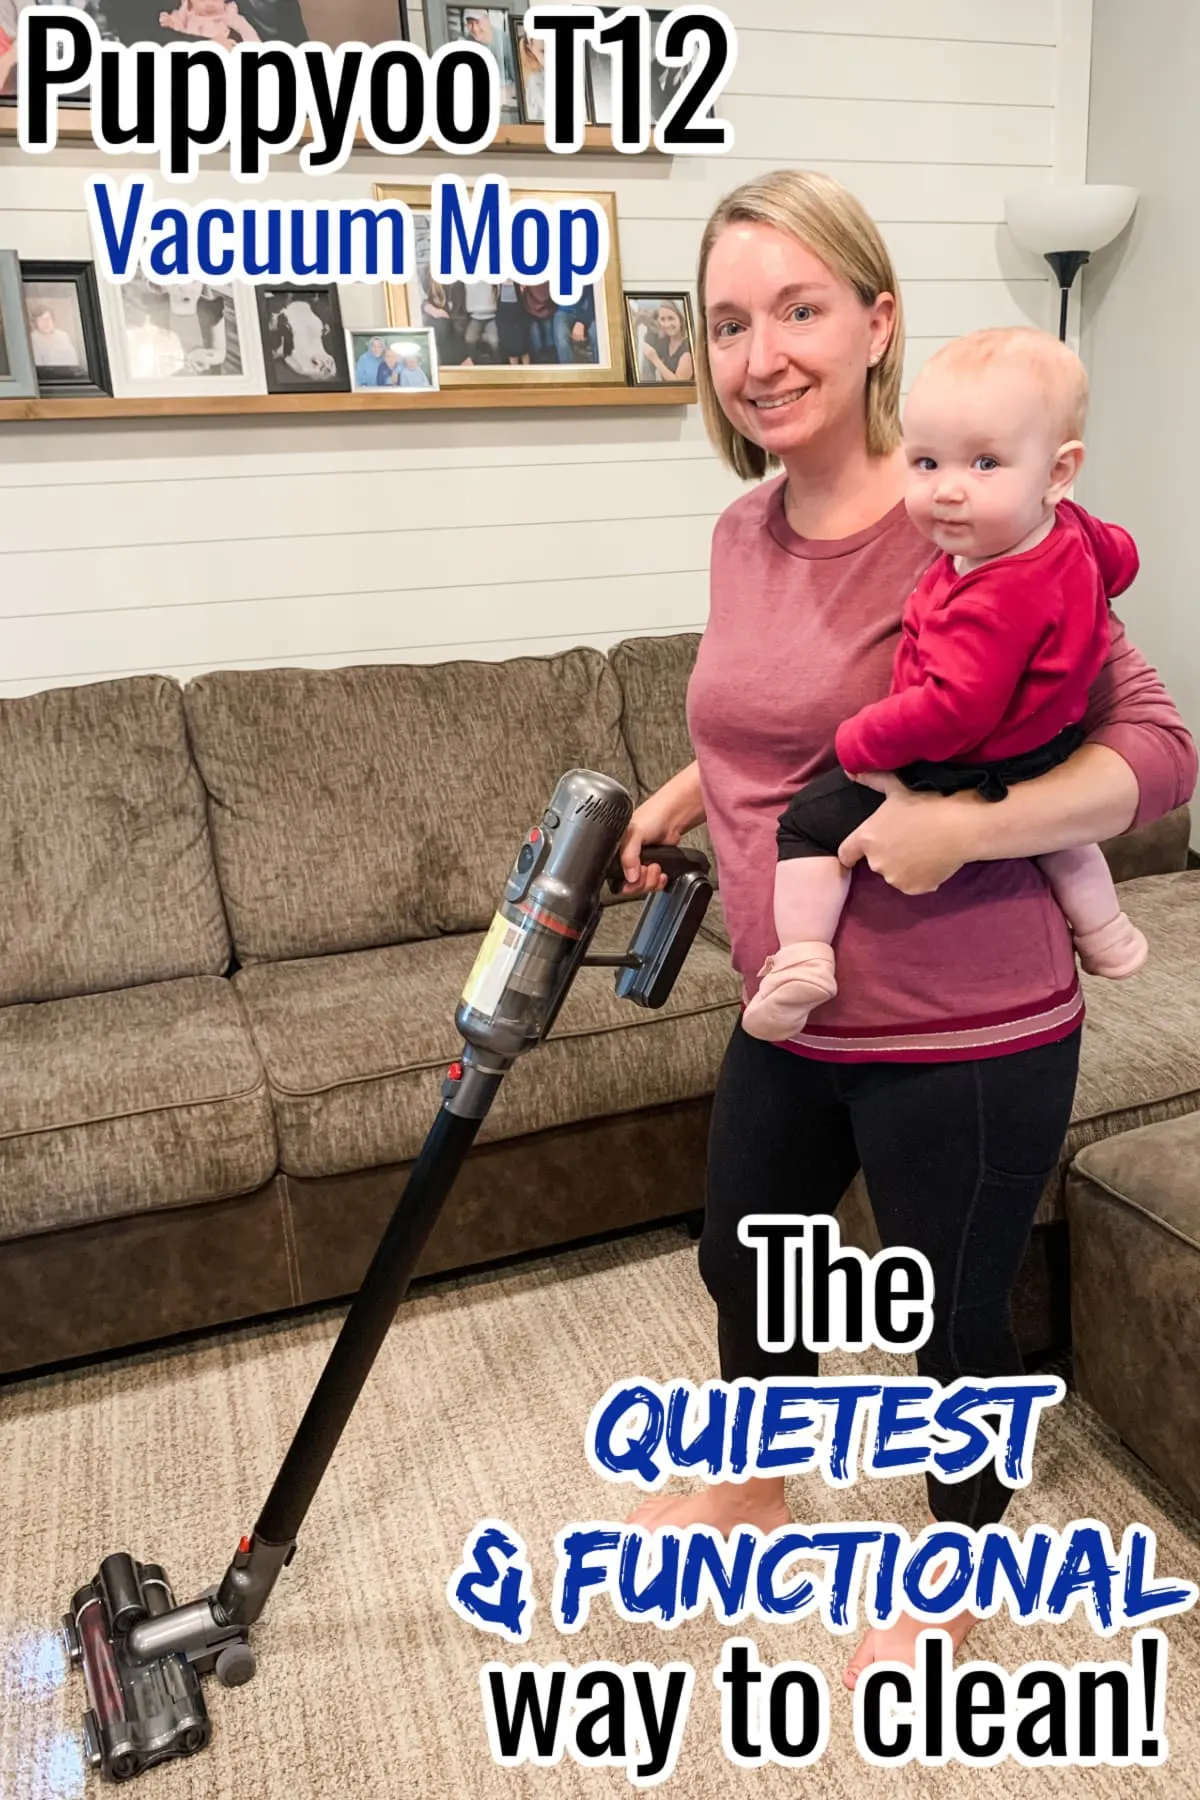 woman and baby vacuuming - Puppyoo T12 Plus Rinse Vacuum & Mop 2-in-1 Review - The Quietest Vacuum Mop You'll Find!